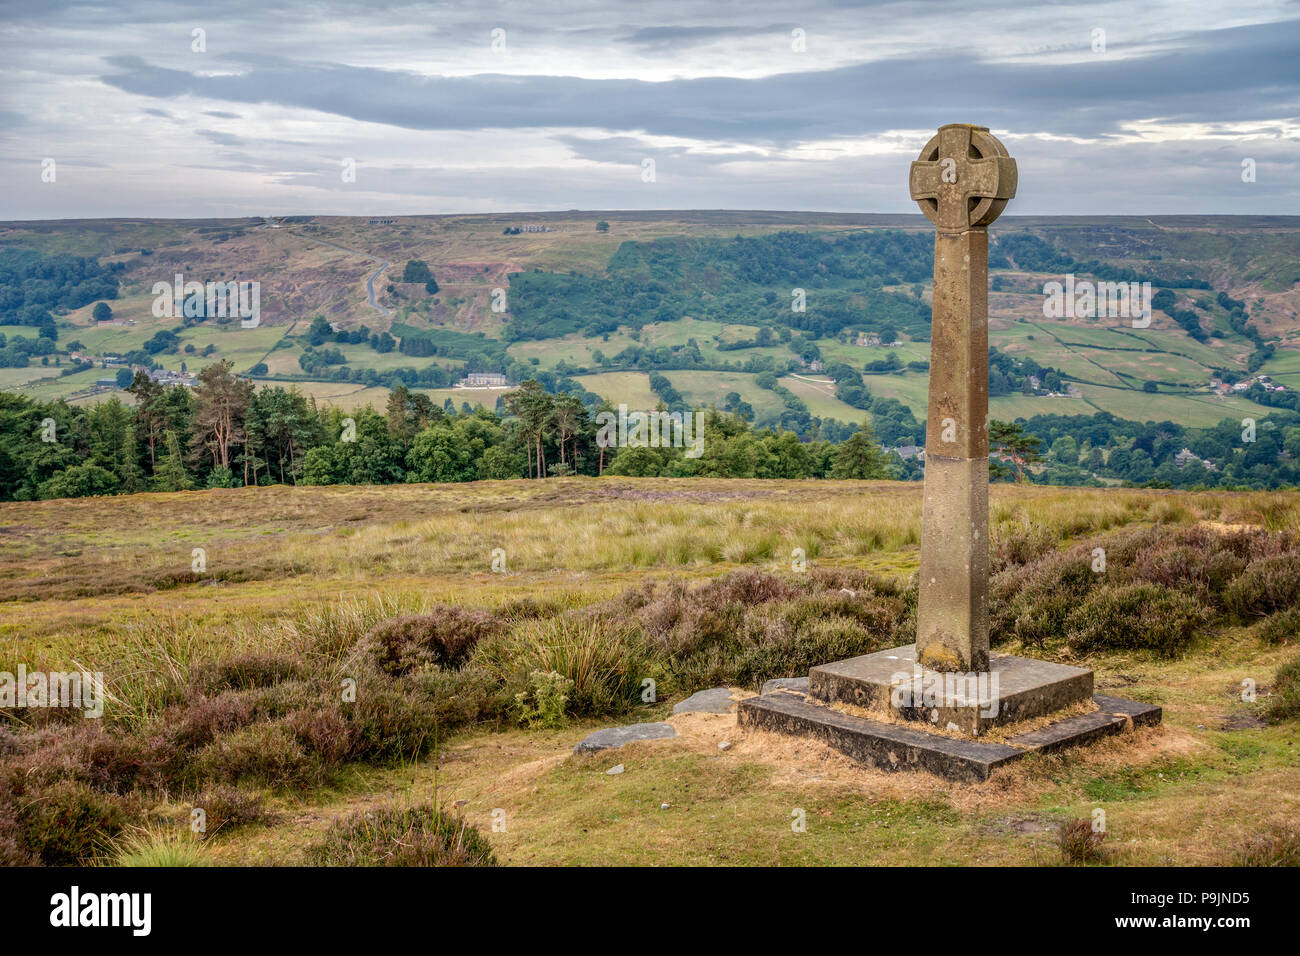 Millennium Cross at Rosedale Abbey  with Chimney Bank road in the background on The North York Moors, England  The cross was erected to mark the Stock Photo